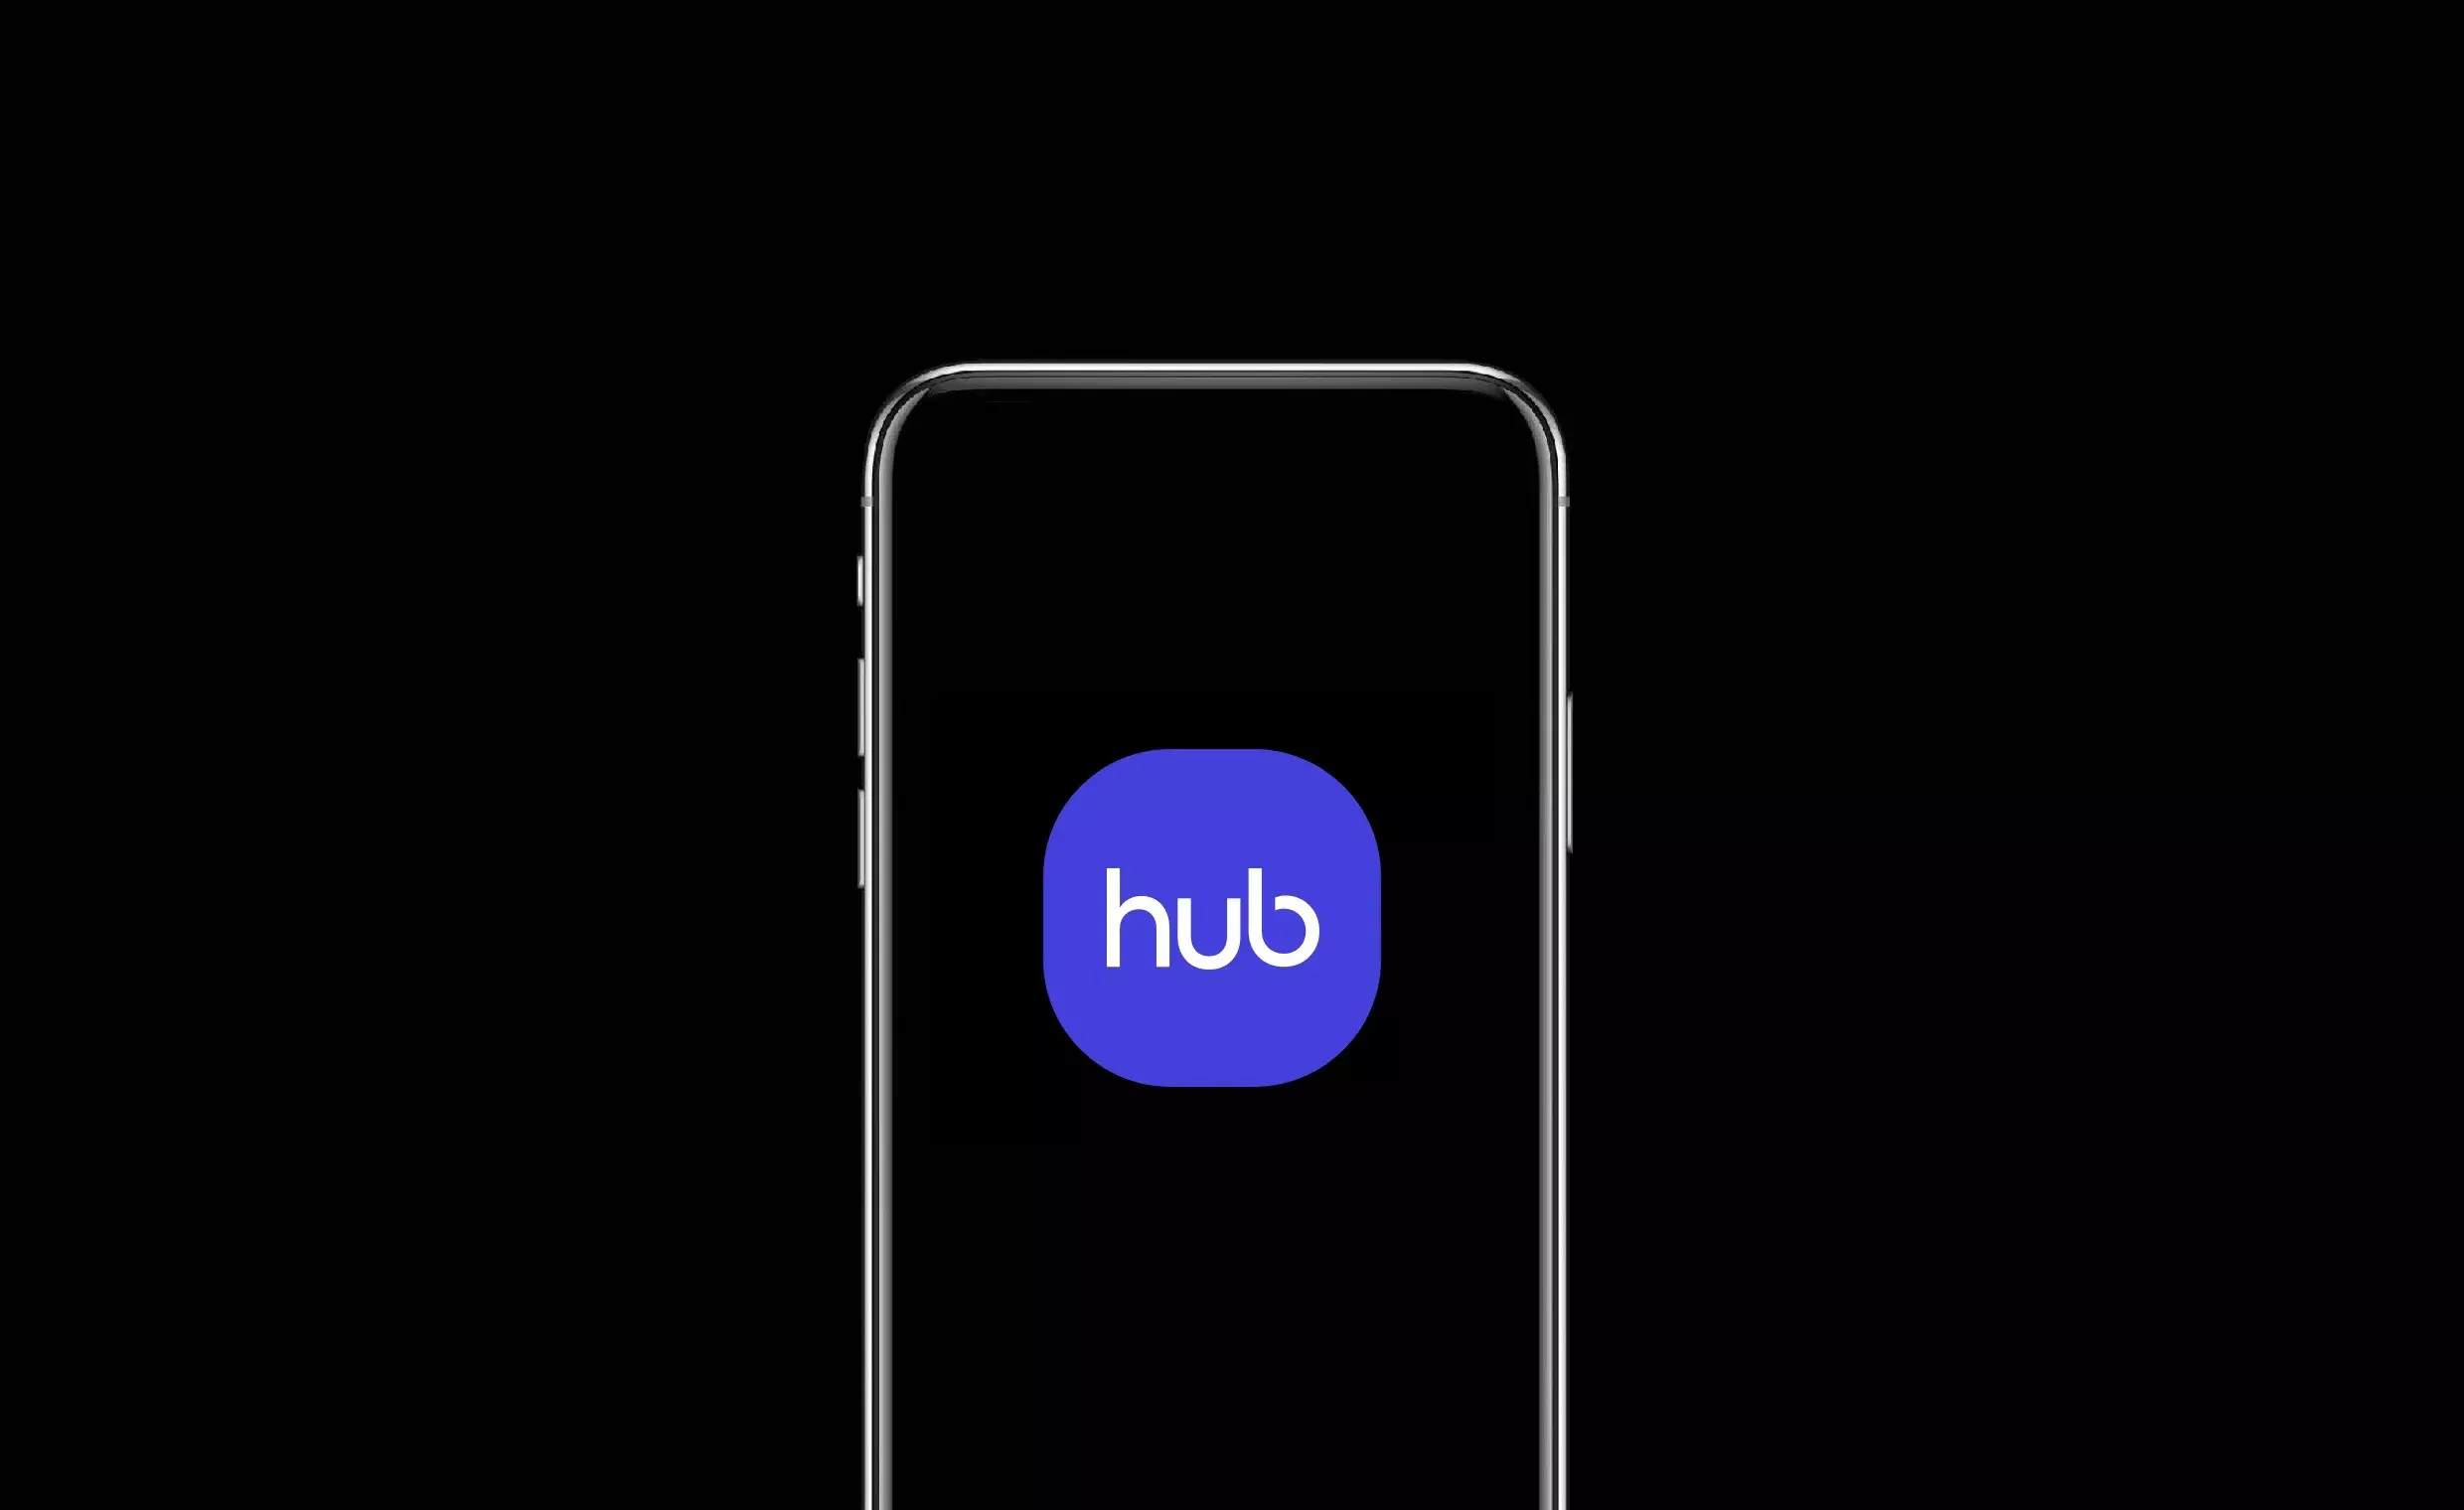 The Hub icon on a phone screen